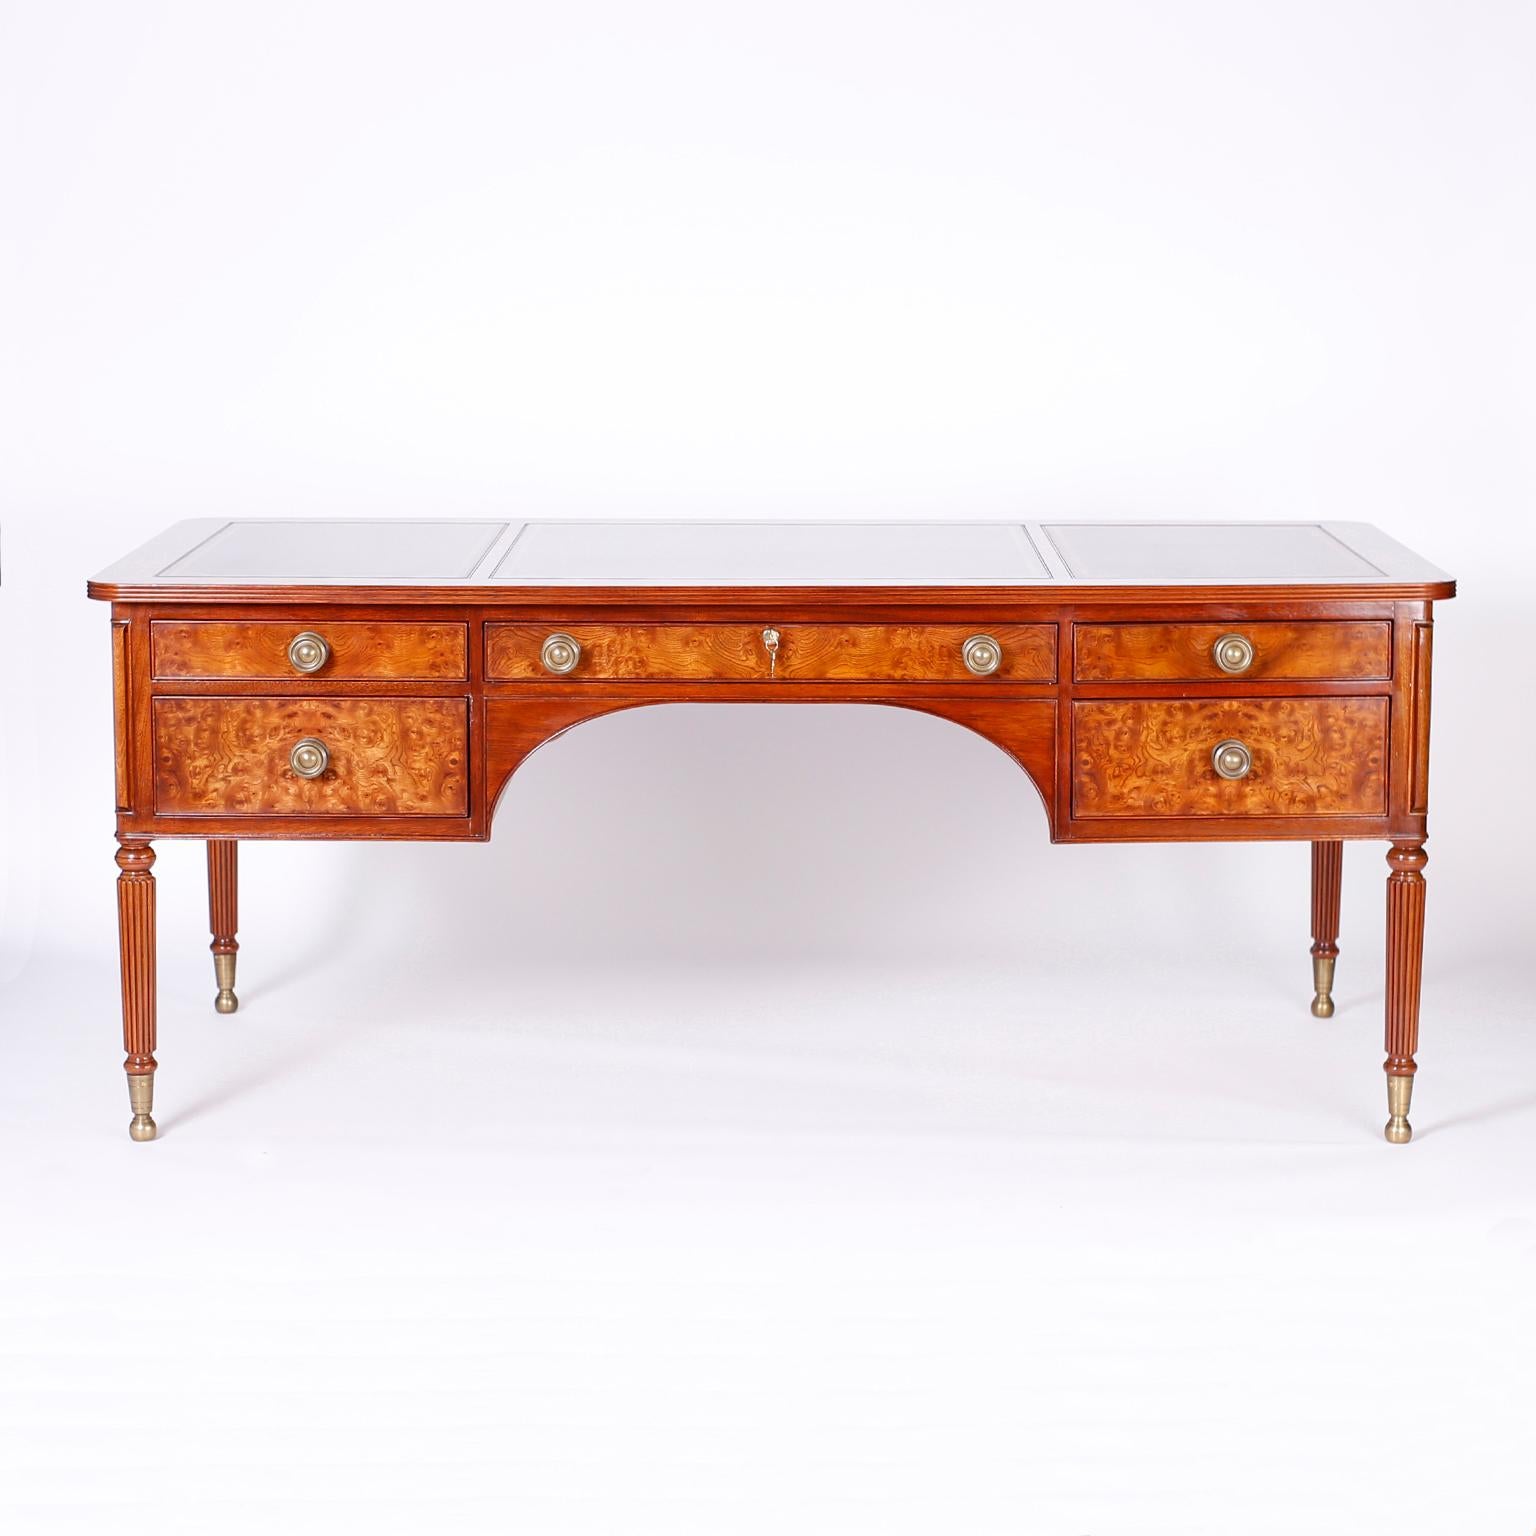 British Colonial Style Leather Top Desk. Five drawer desk crafted in mahogany with a classic form, three tooled brown leather panels on a top with a beaded edge, exotic burled cuts on the drawer fronts and desk sides, brass hardware and turned and